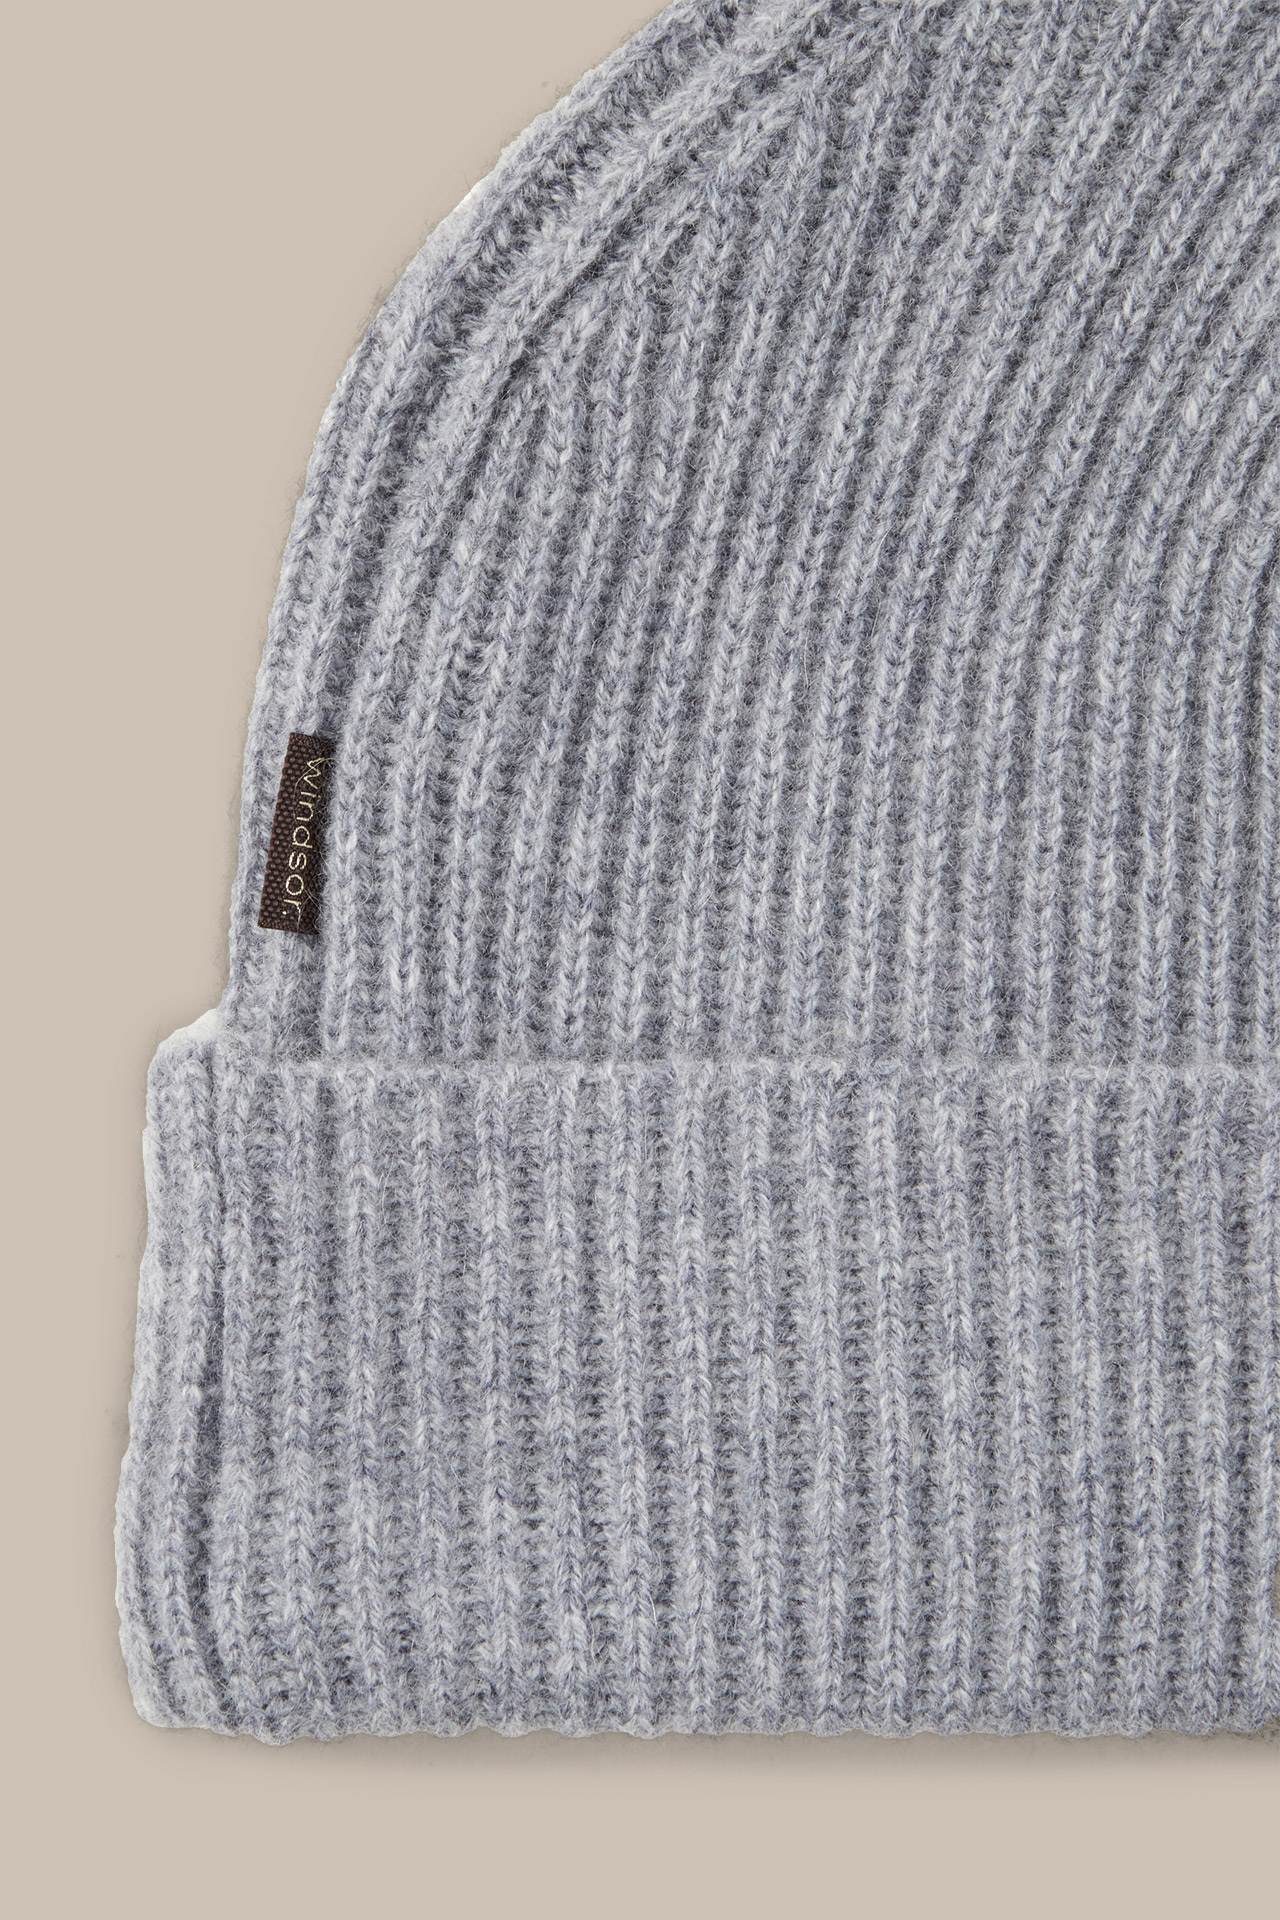 Can Cashmere Hat in mottled Grey